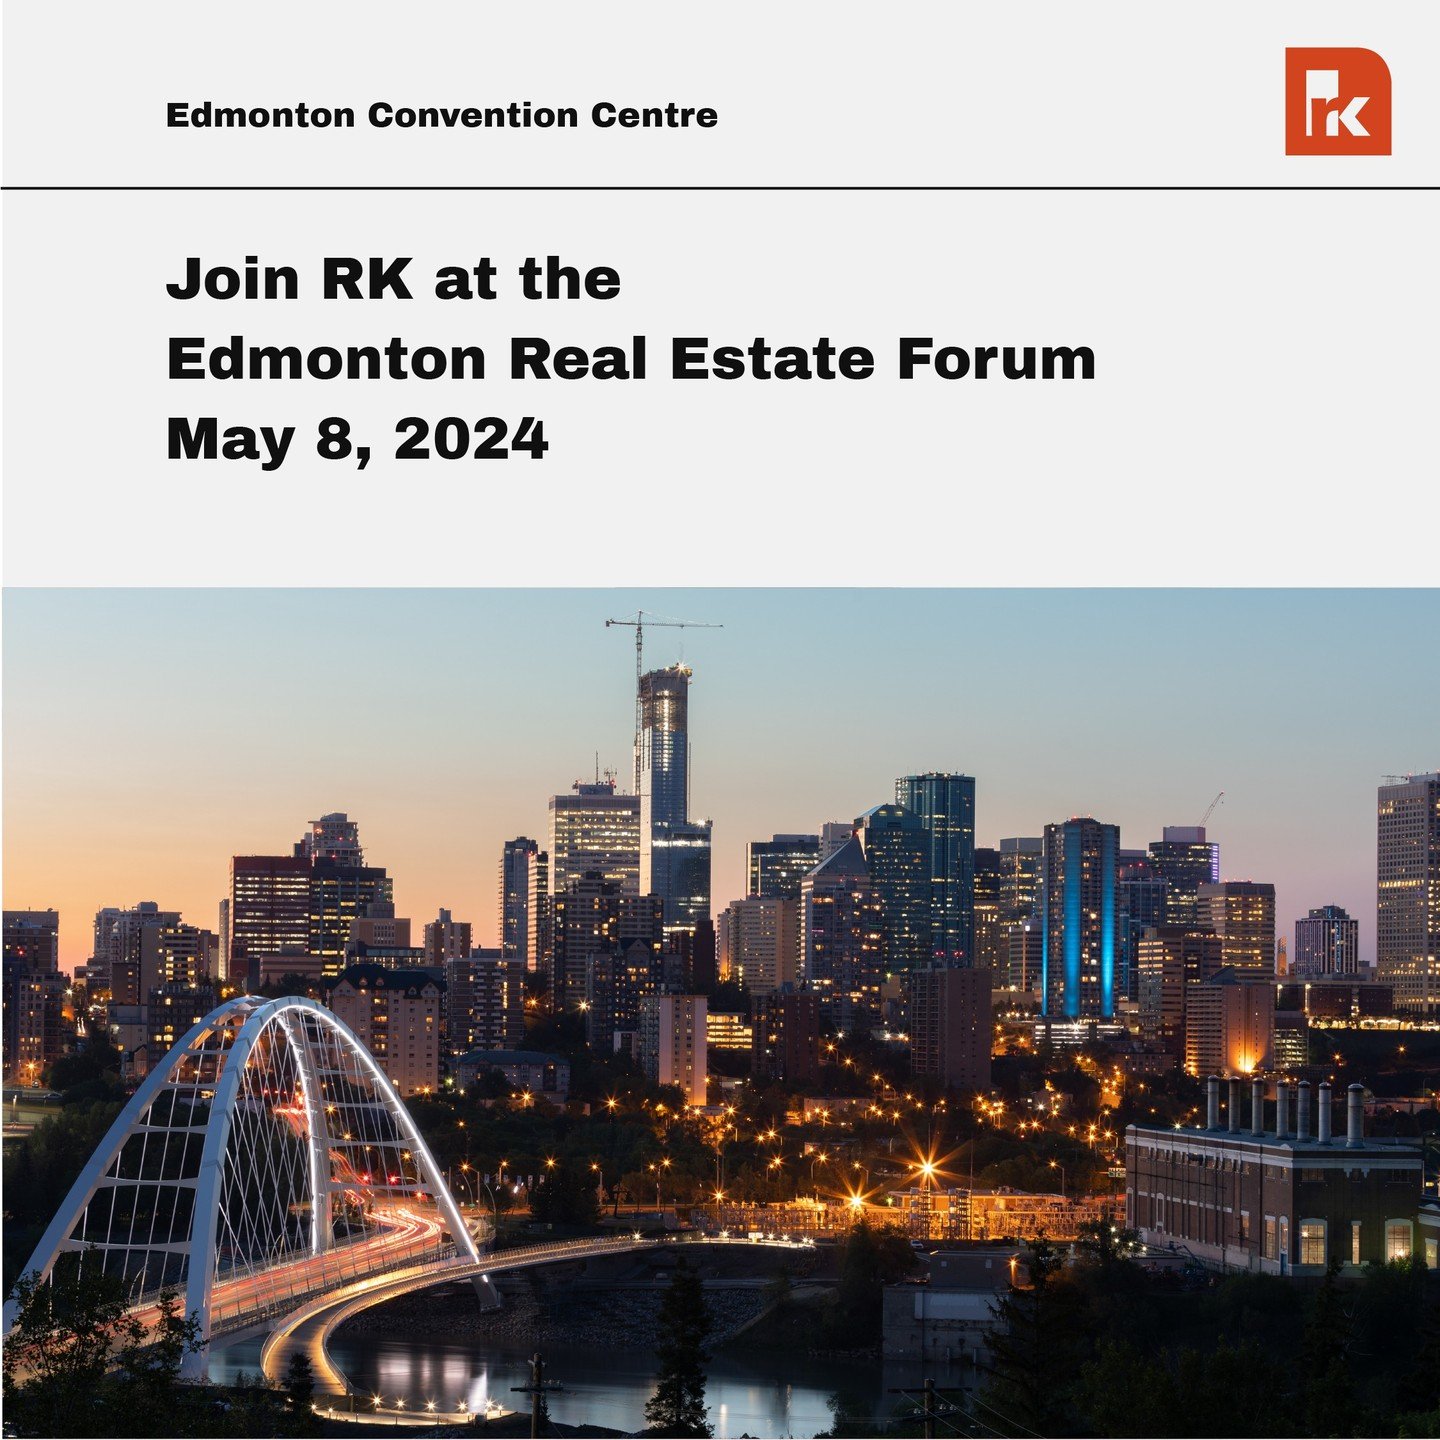 Our very own Niha Prasad-Kroliczek and Adrianne Gillese will be attending the Edmonton Real Estate Forum tomorrow, Wednesday, May 8th, at the Edmonton Convention Centre. They're eagerly anticipating discovering how the thriving Alberta market is fuel